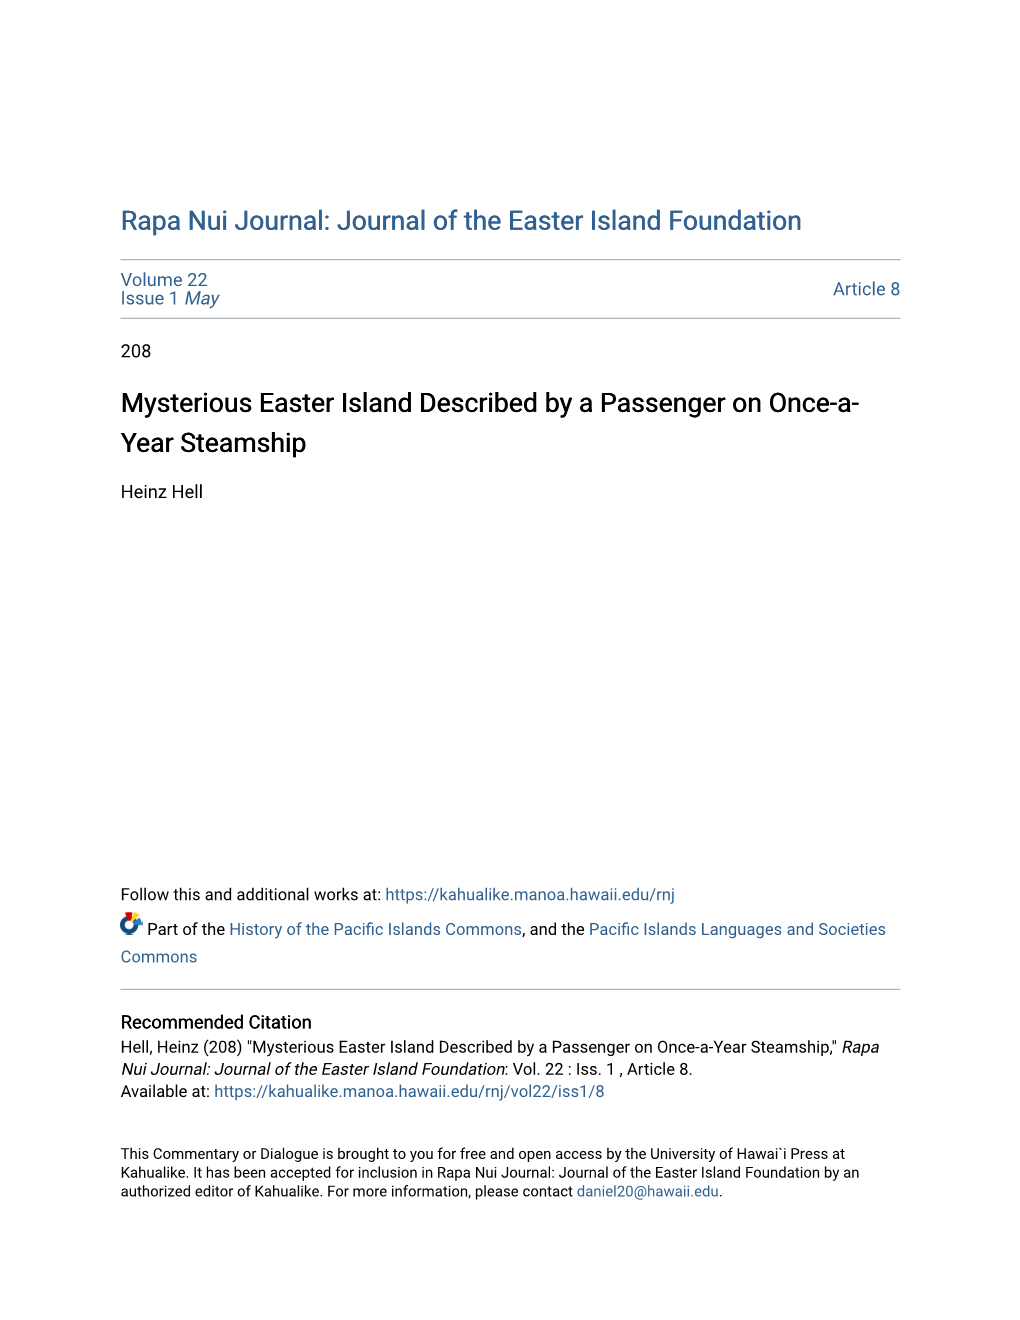 Mysterious Easter Island Described by a Passenger on Once-A-Year Steamship," Rapa Nui Journal: Journal of the Easter Island Foundation: Vol